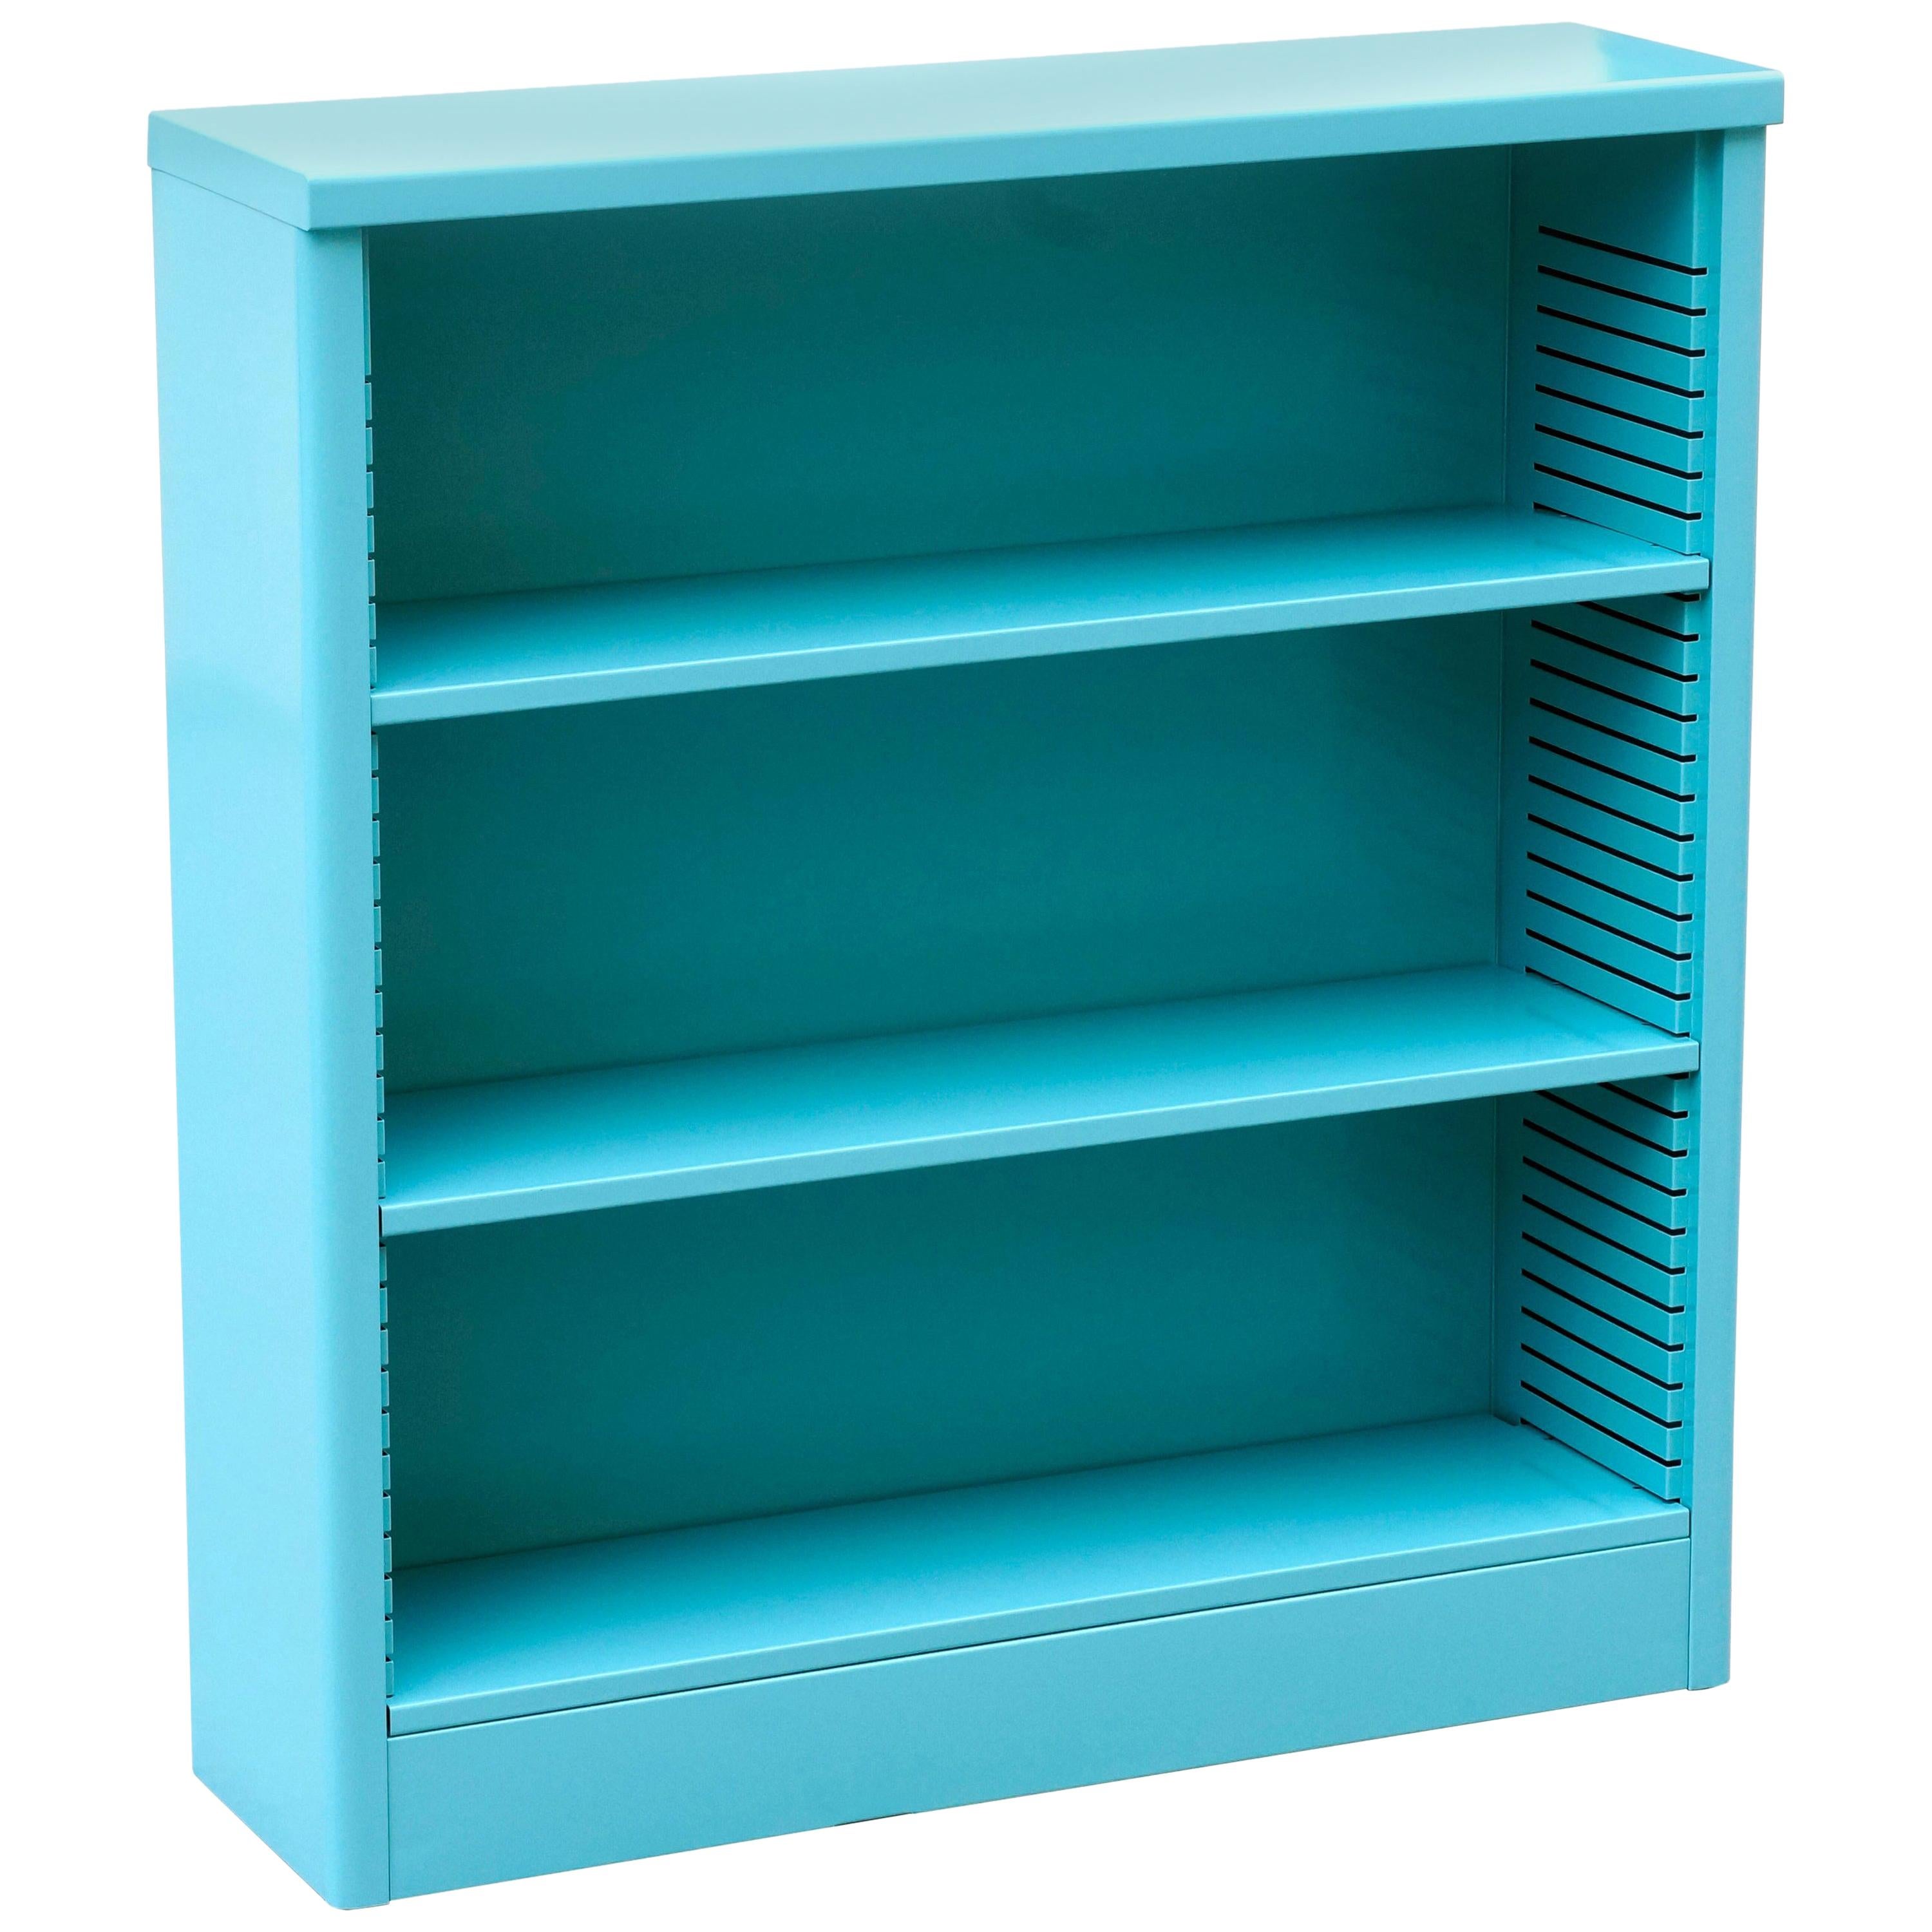 1960s Steel Bookcase in Turquoise, Custom Refinished For Sale